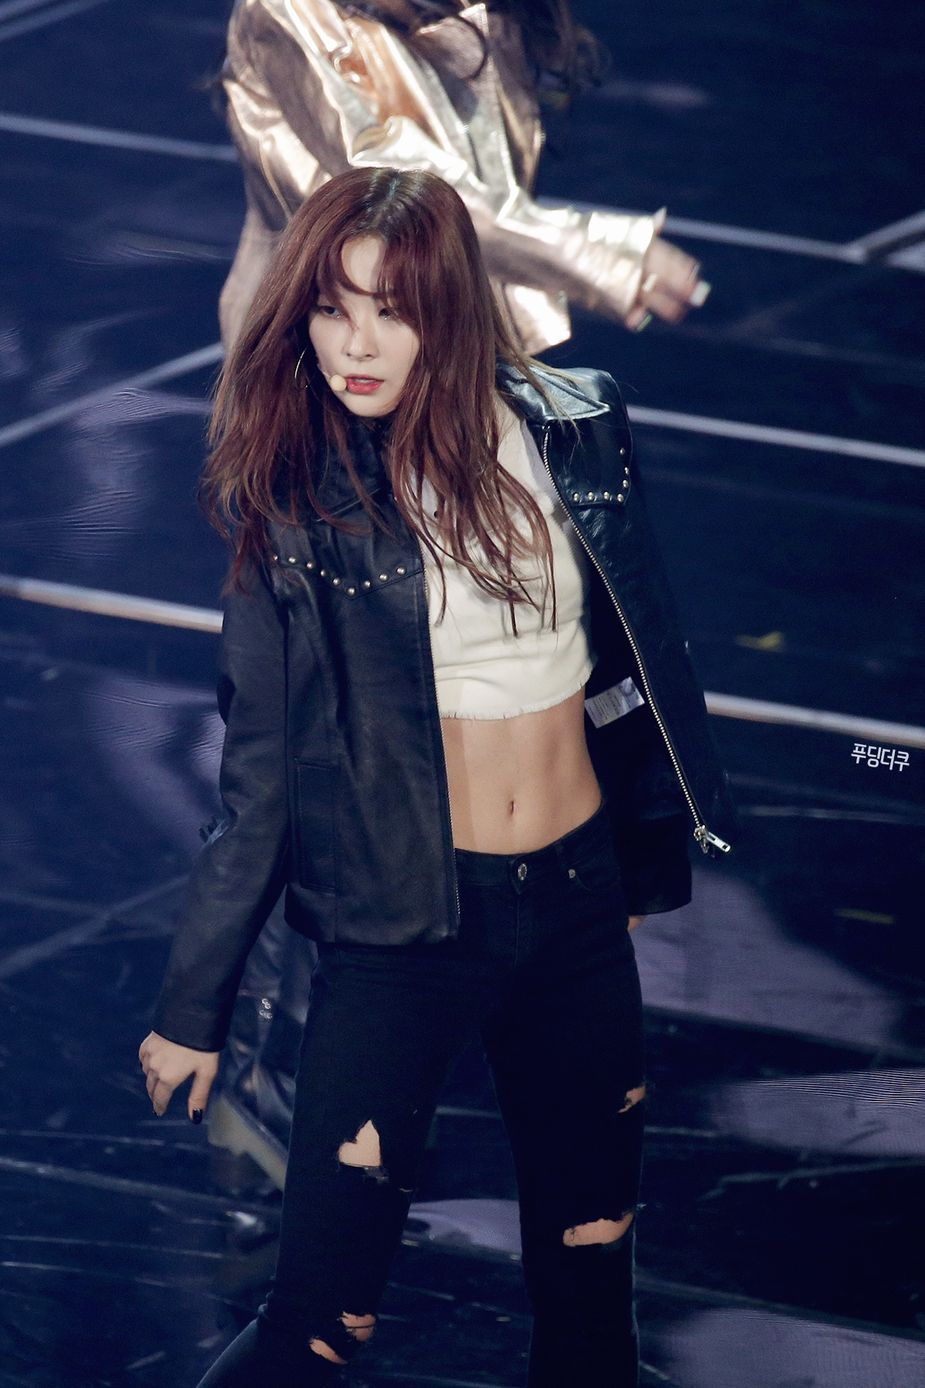 Seulgi rocks this sexy biker chick look. / Source: FIDDLE